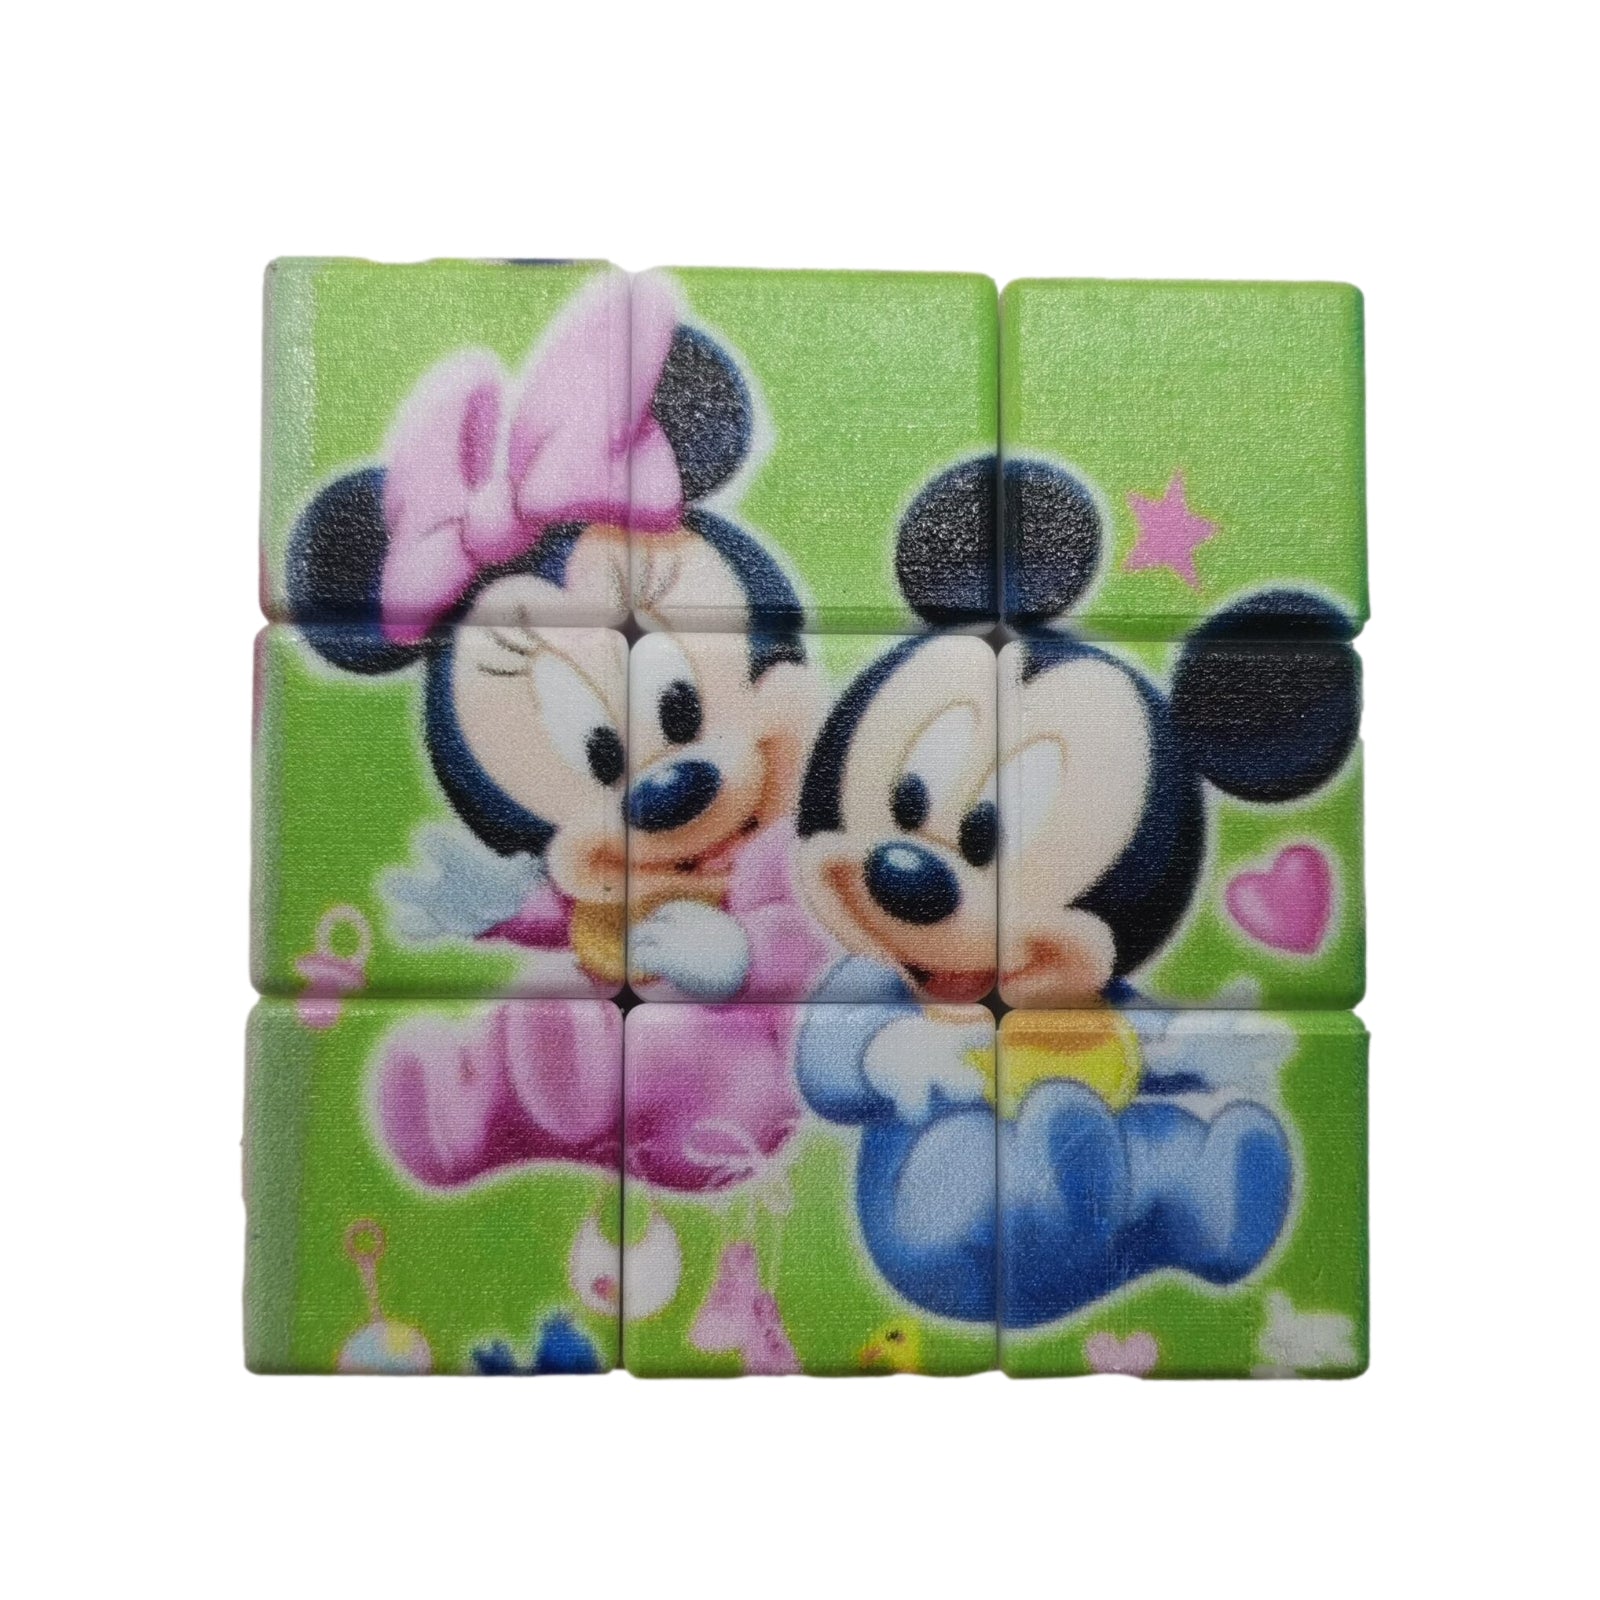 4pcs Mickey Mouse Minnie Mouse Rubiks cube toy keychain cube key ring chain - Homeware Discounts